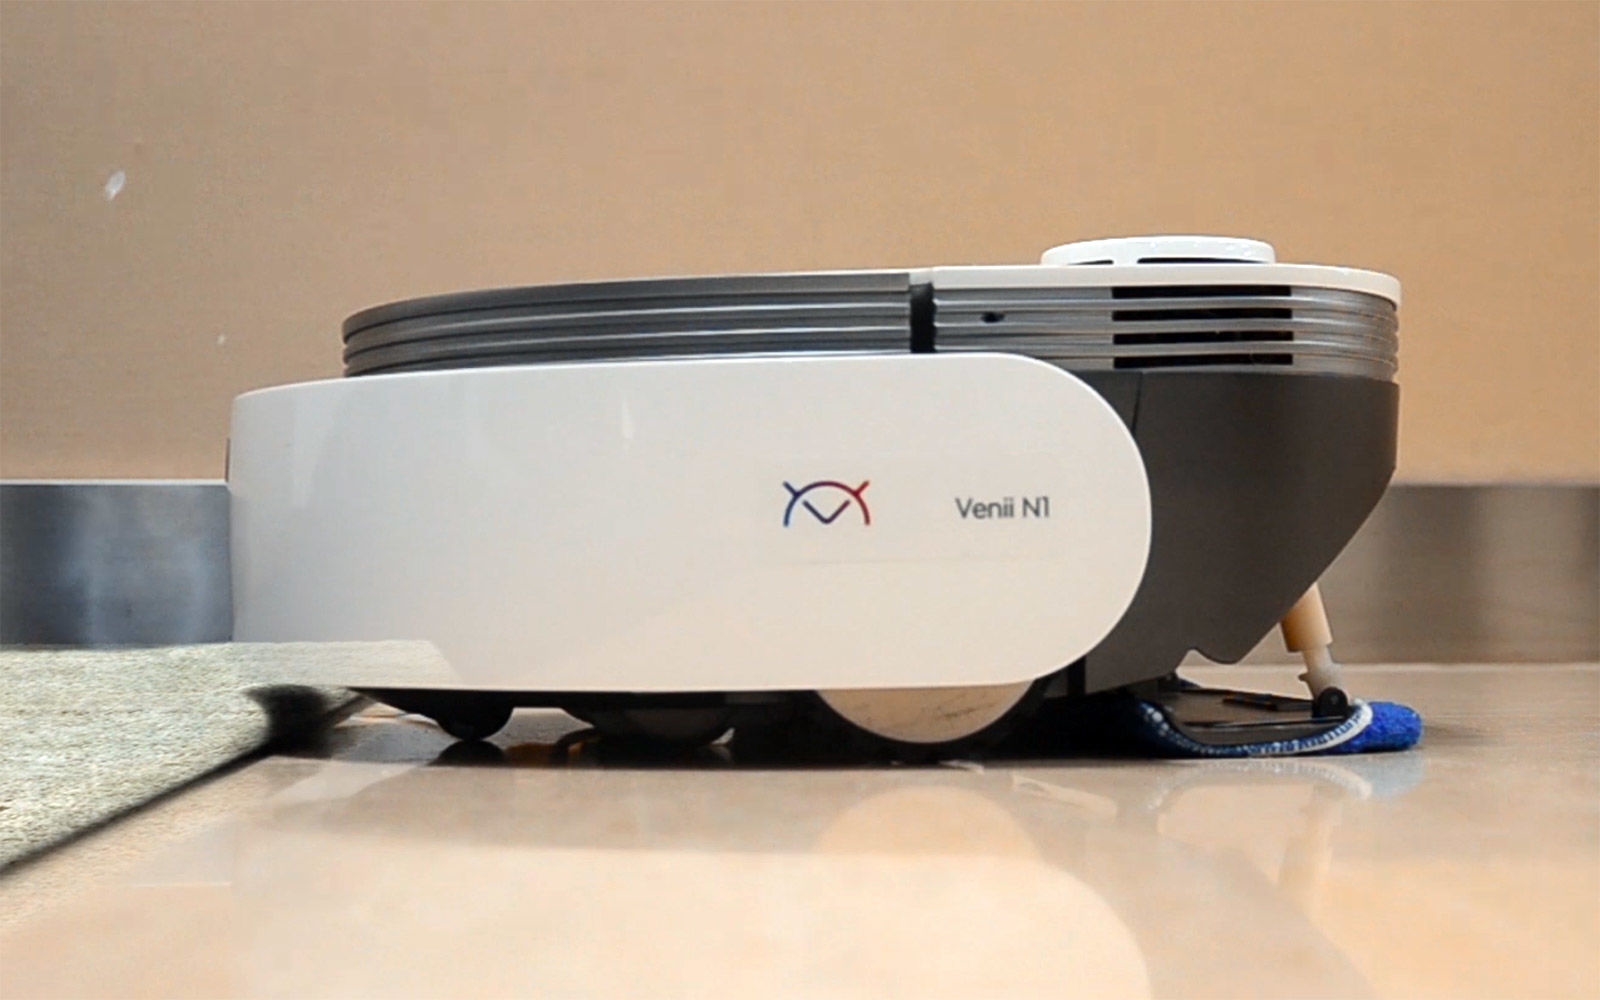 This cleaning robot can clean its own mop and dodge dog poo | DeviceDaily.com